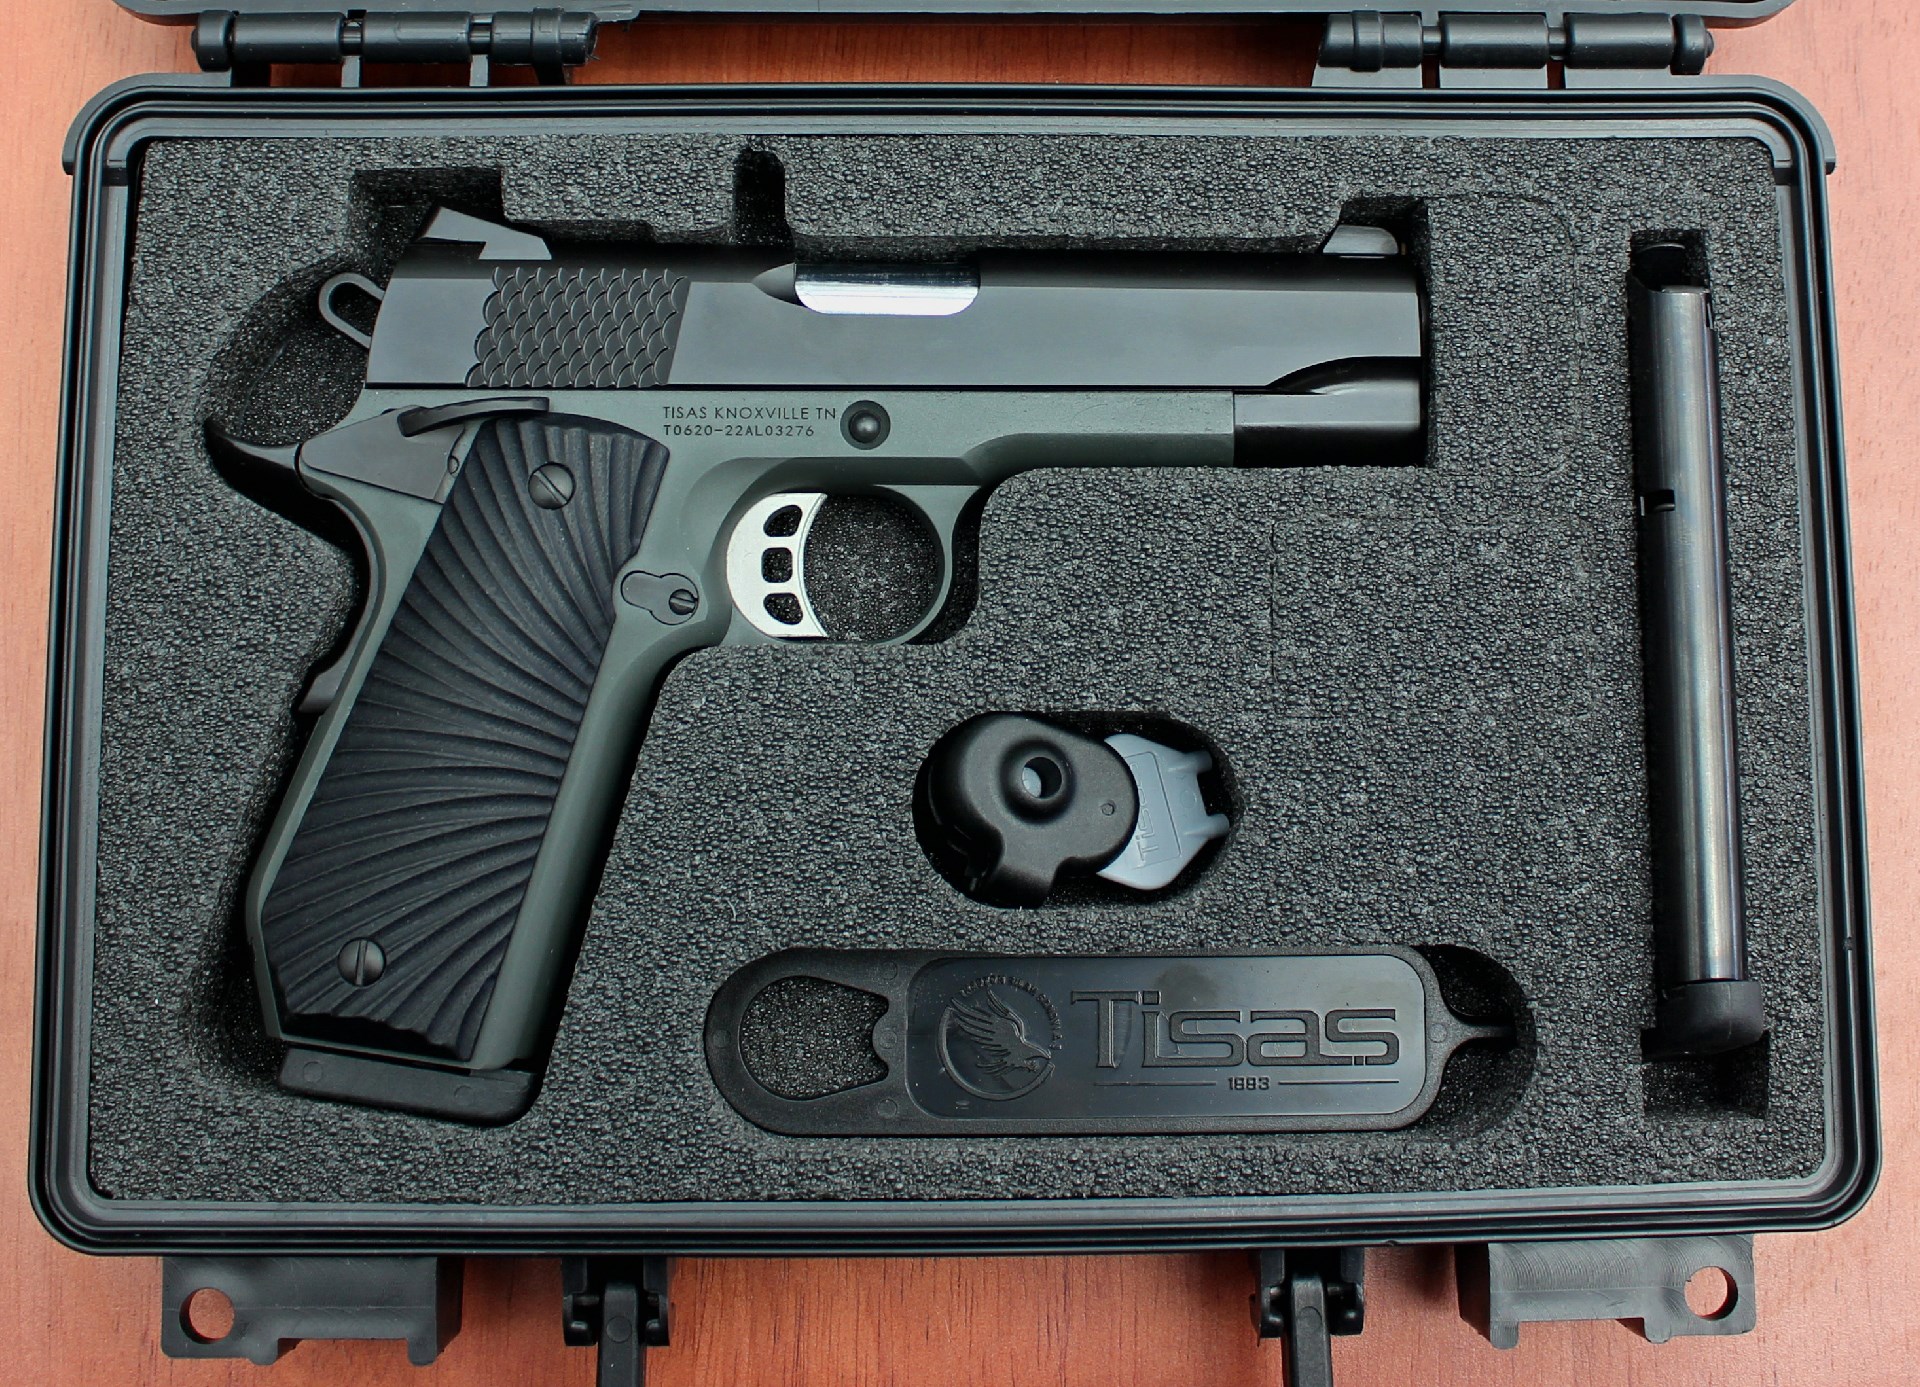 Right-side view of m1911 tisas pistol in foam case molded parts accessories